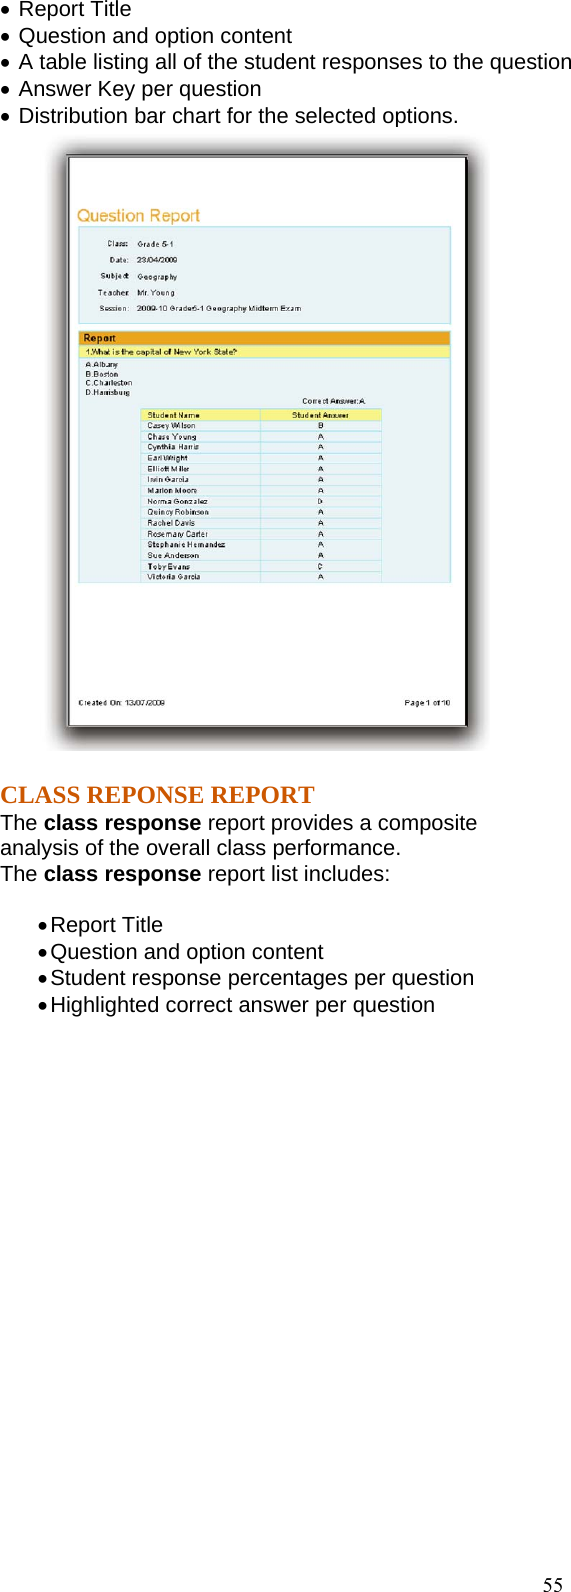  55 •  Report Title •  Question and option content •  A table listing all of the student responses to the question •  Answer Key per question •  Distribution bar chart for the selected options.  CLASS REPONSE REPORT The class response report provides a composite   analysis of the overall class performance.   The class response report list includes:  • Report Title • Question and option content • Student response percentages per question • Highlighted correct answer per question 